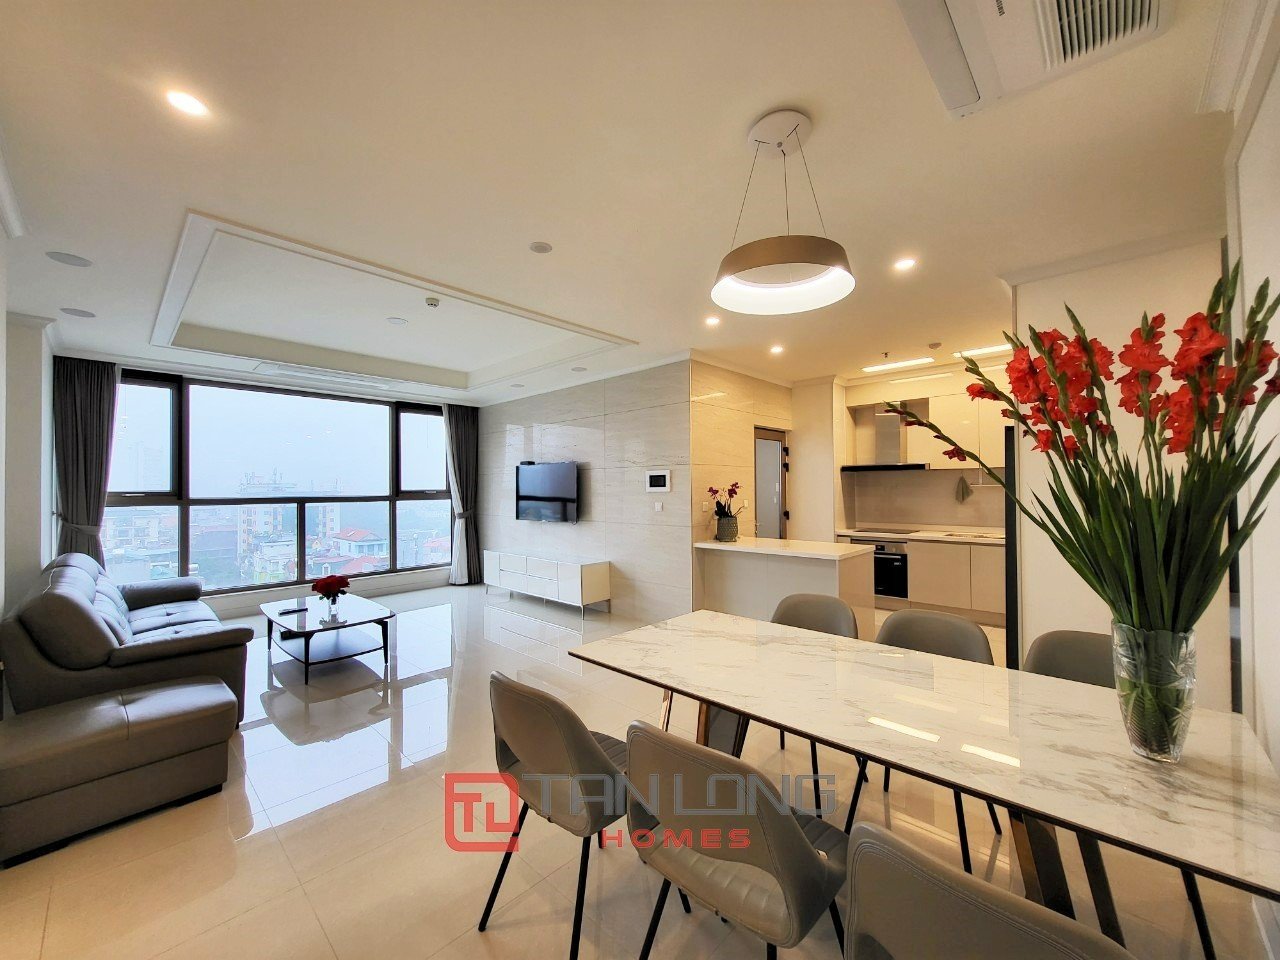 For sale: An apartment G in Starlake Tay Ho Tay - Building 901